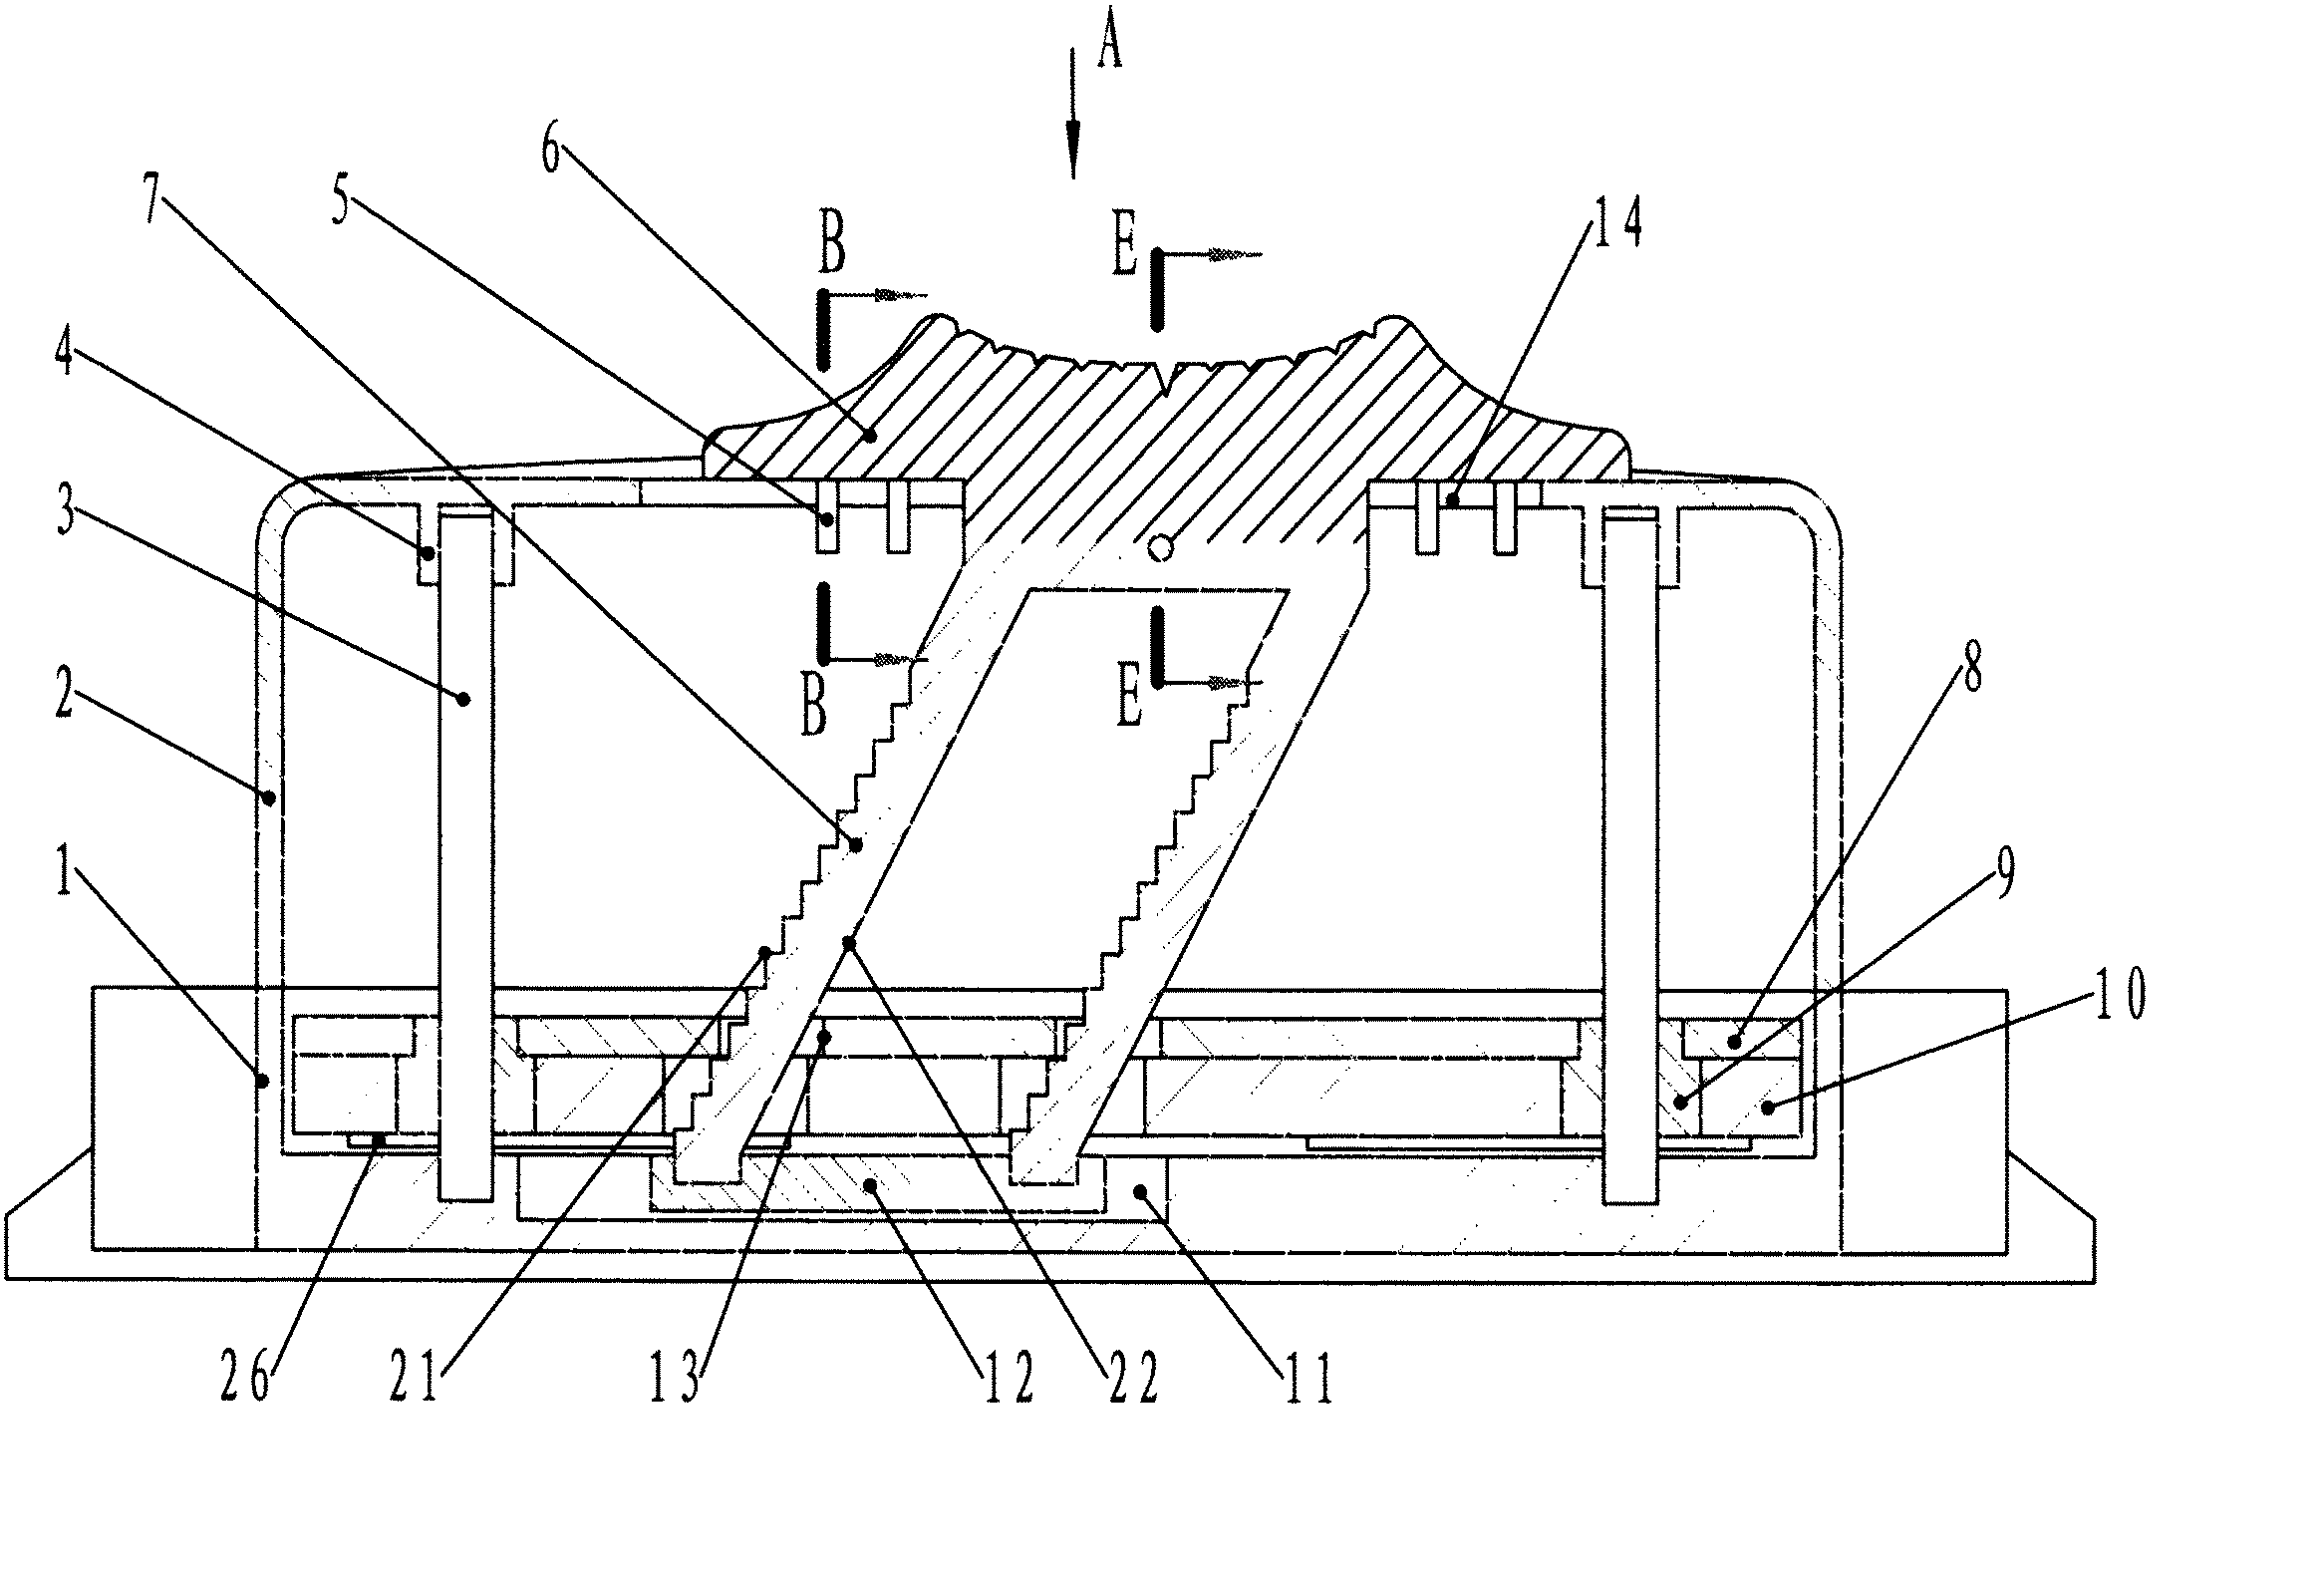 Magnetism adjusting device mounted on body of magnetic glass wiper